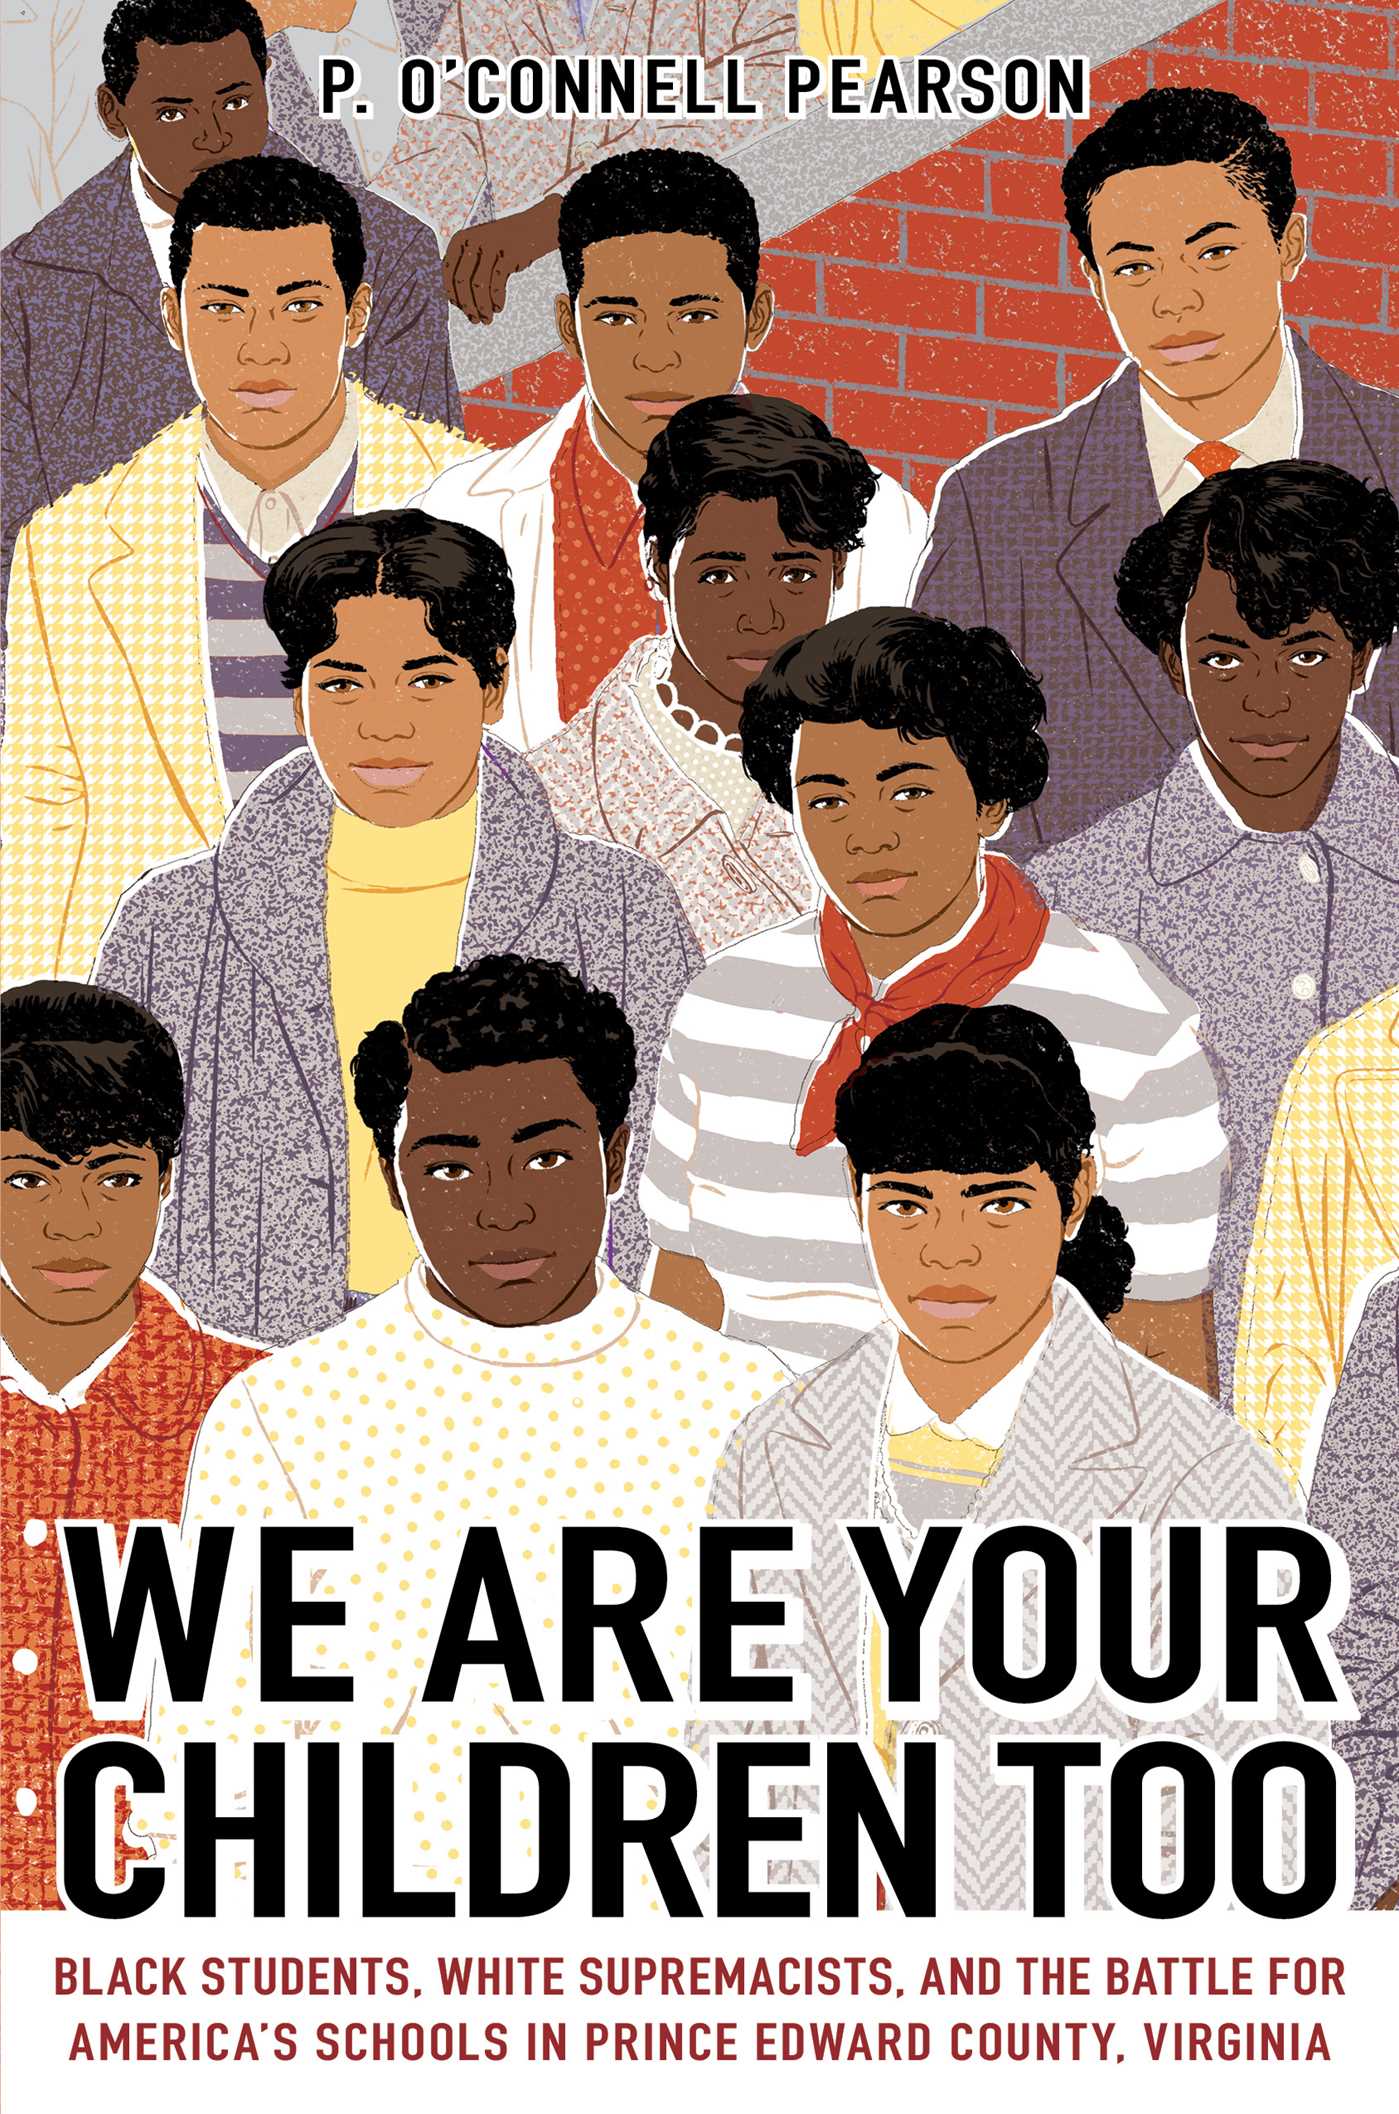 Image for "We Are Your Children Too"